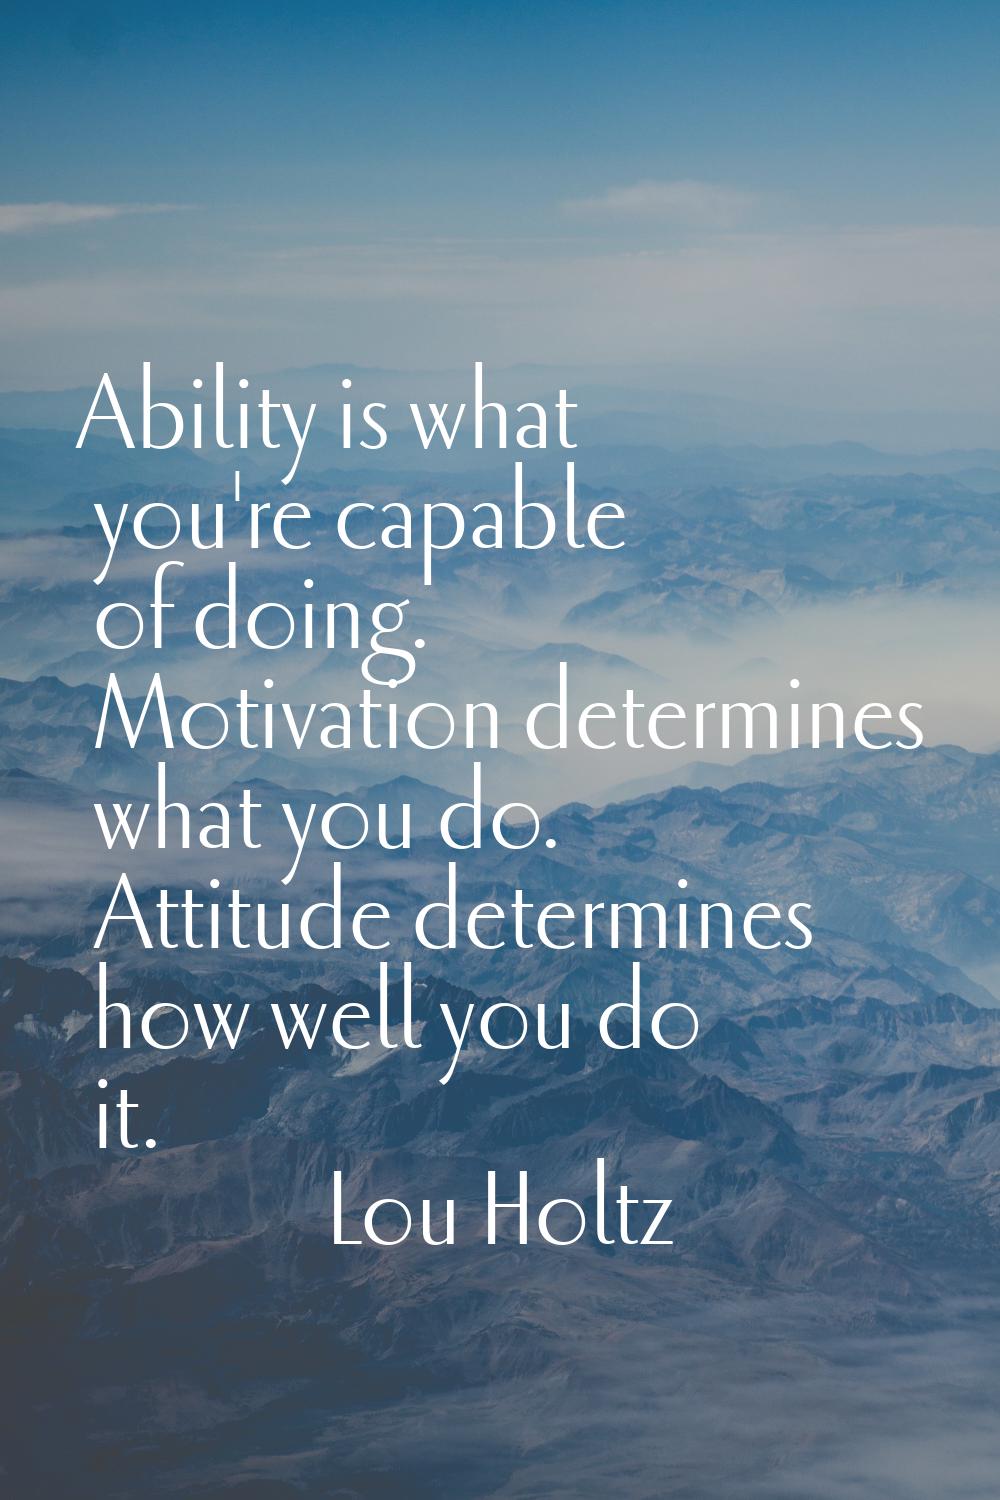 Ability is what you're capable of doing. Motivation determines what you do. Attitude determines how